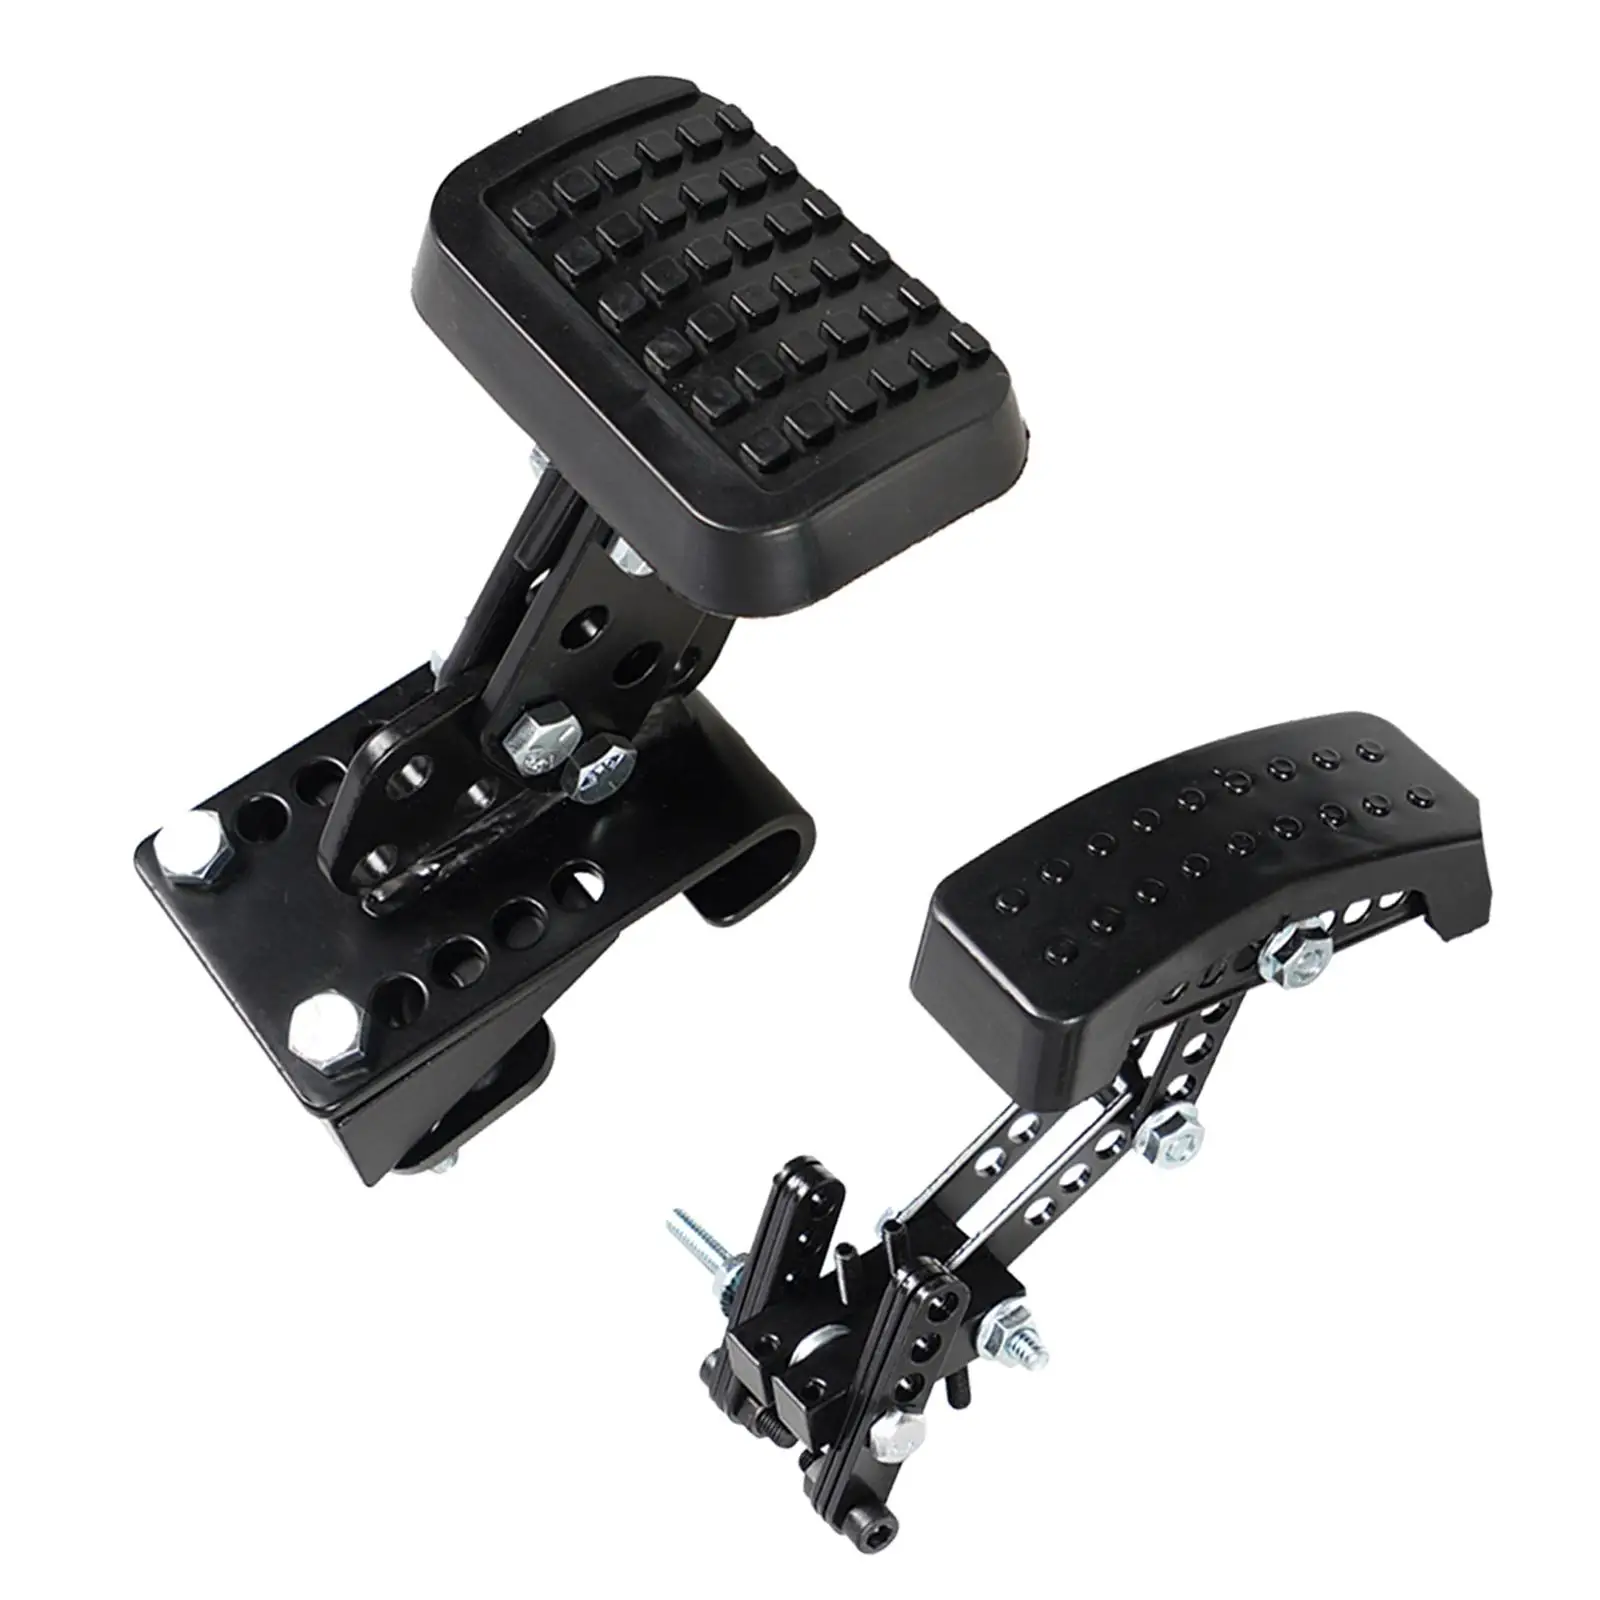 Universal Car Brake Pedal Extender for Modification Accessories Parts Vehicle